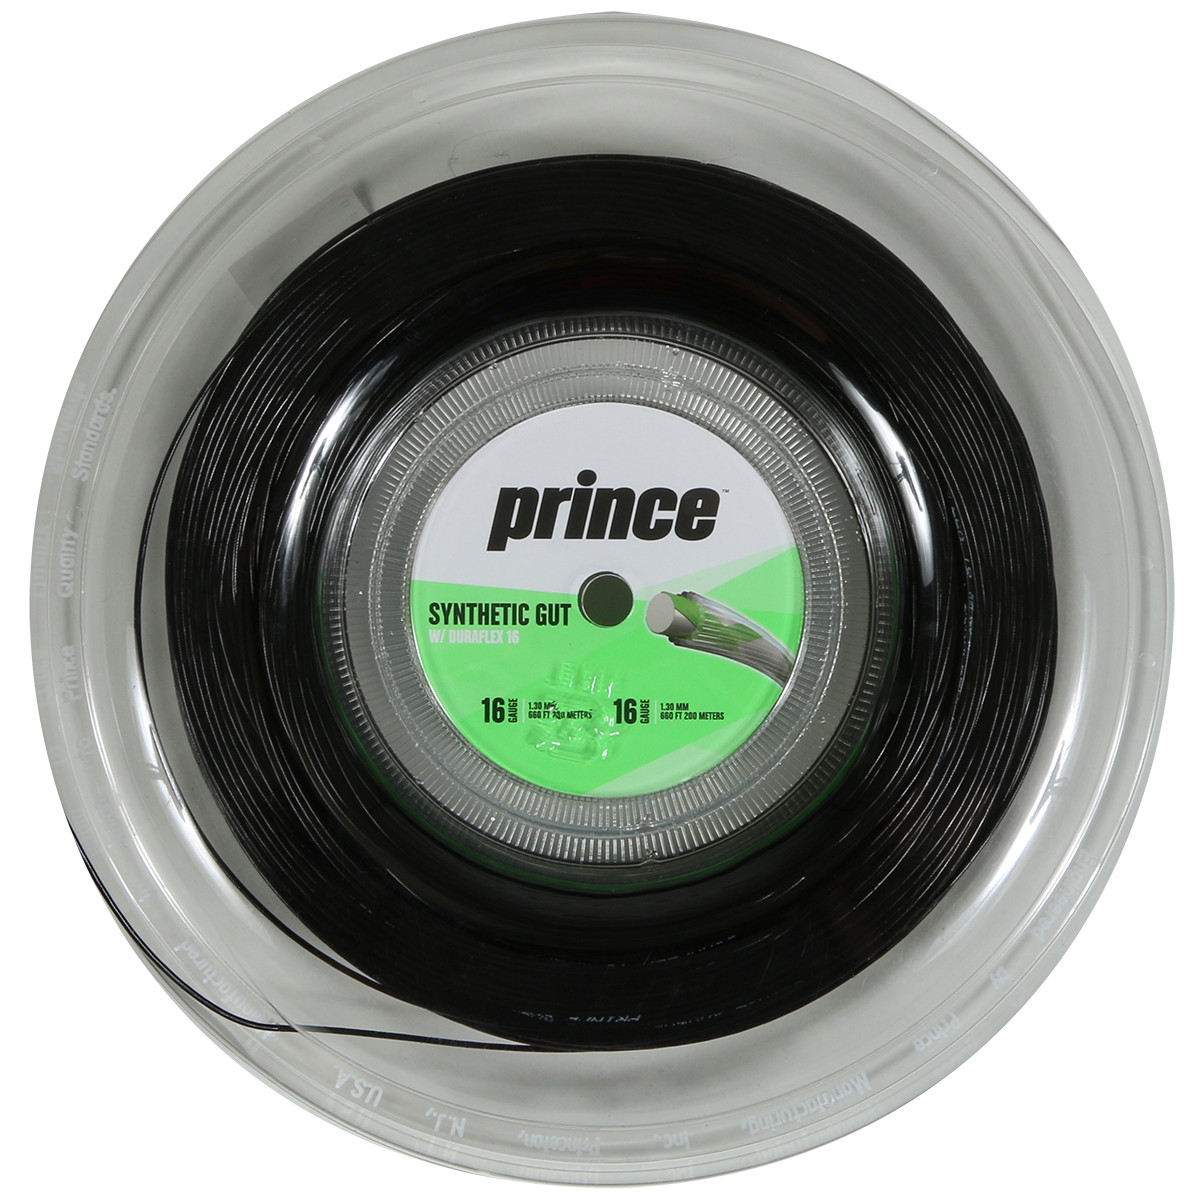 PRINCE SUPER SYNTHETIC GUT DURAFLEX (200 METERS) STRING REEL - PRINCE -  String